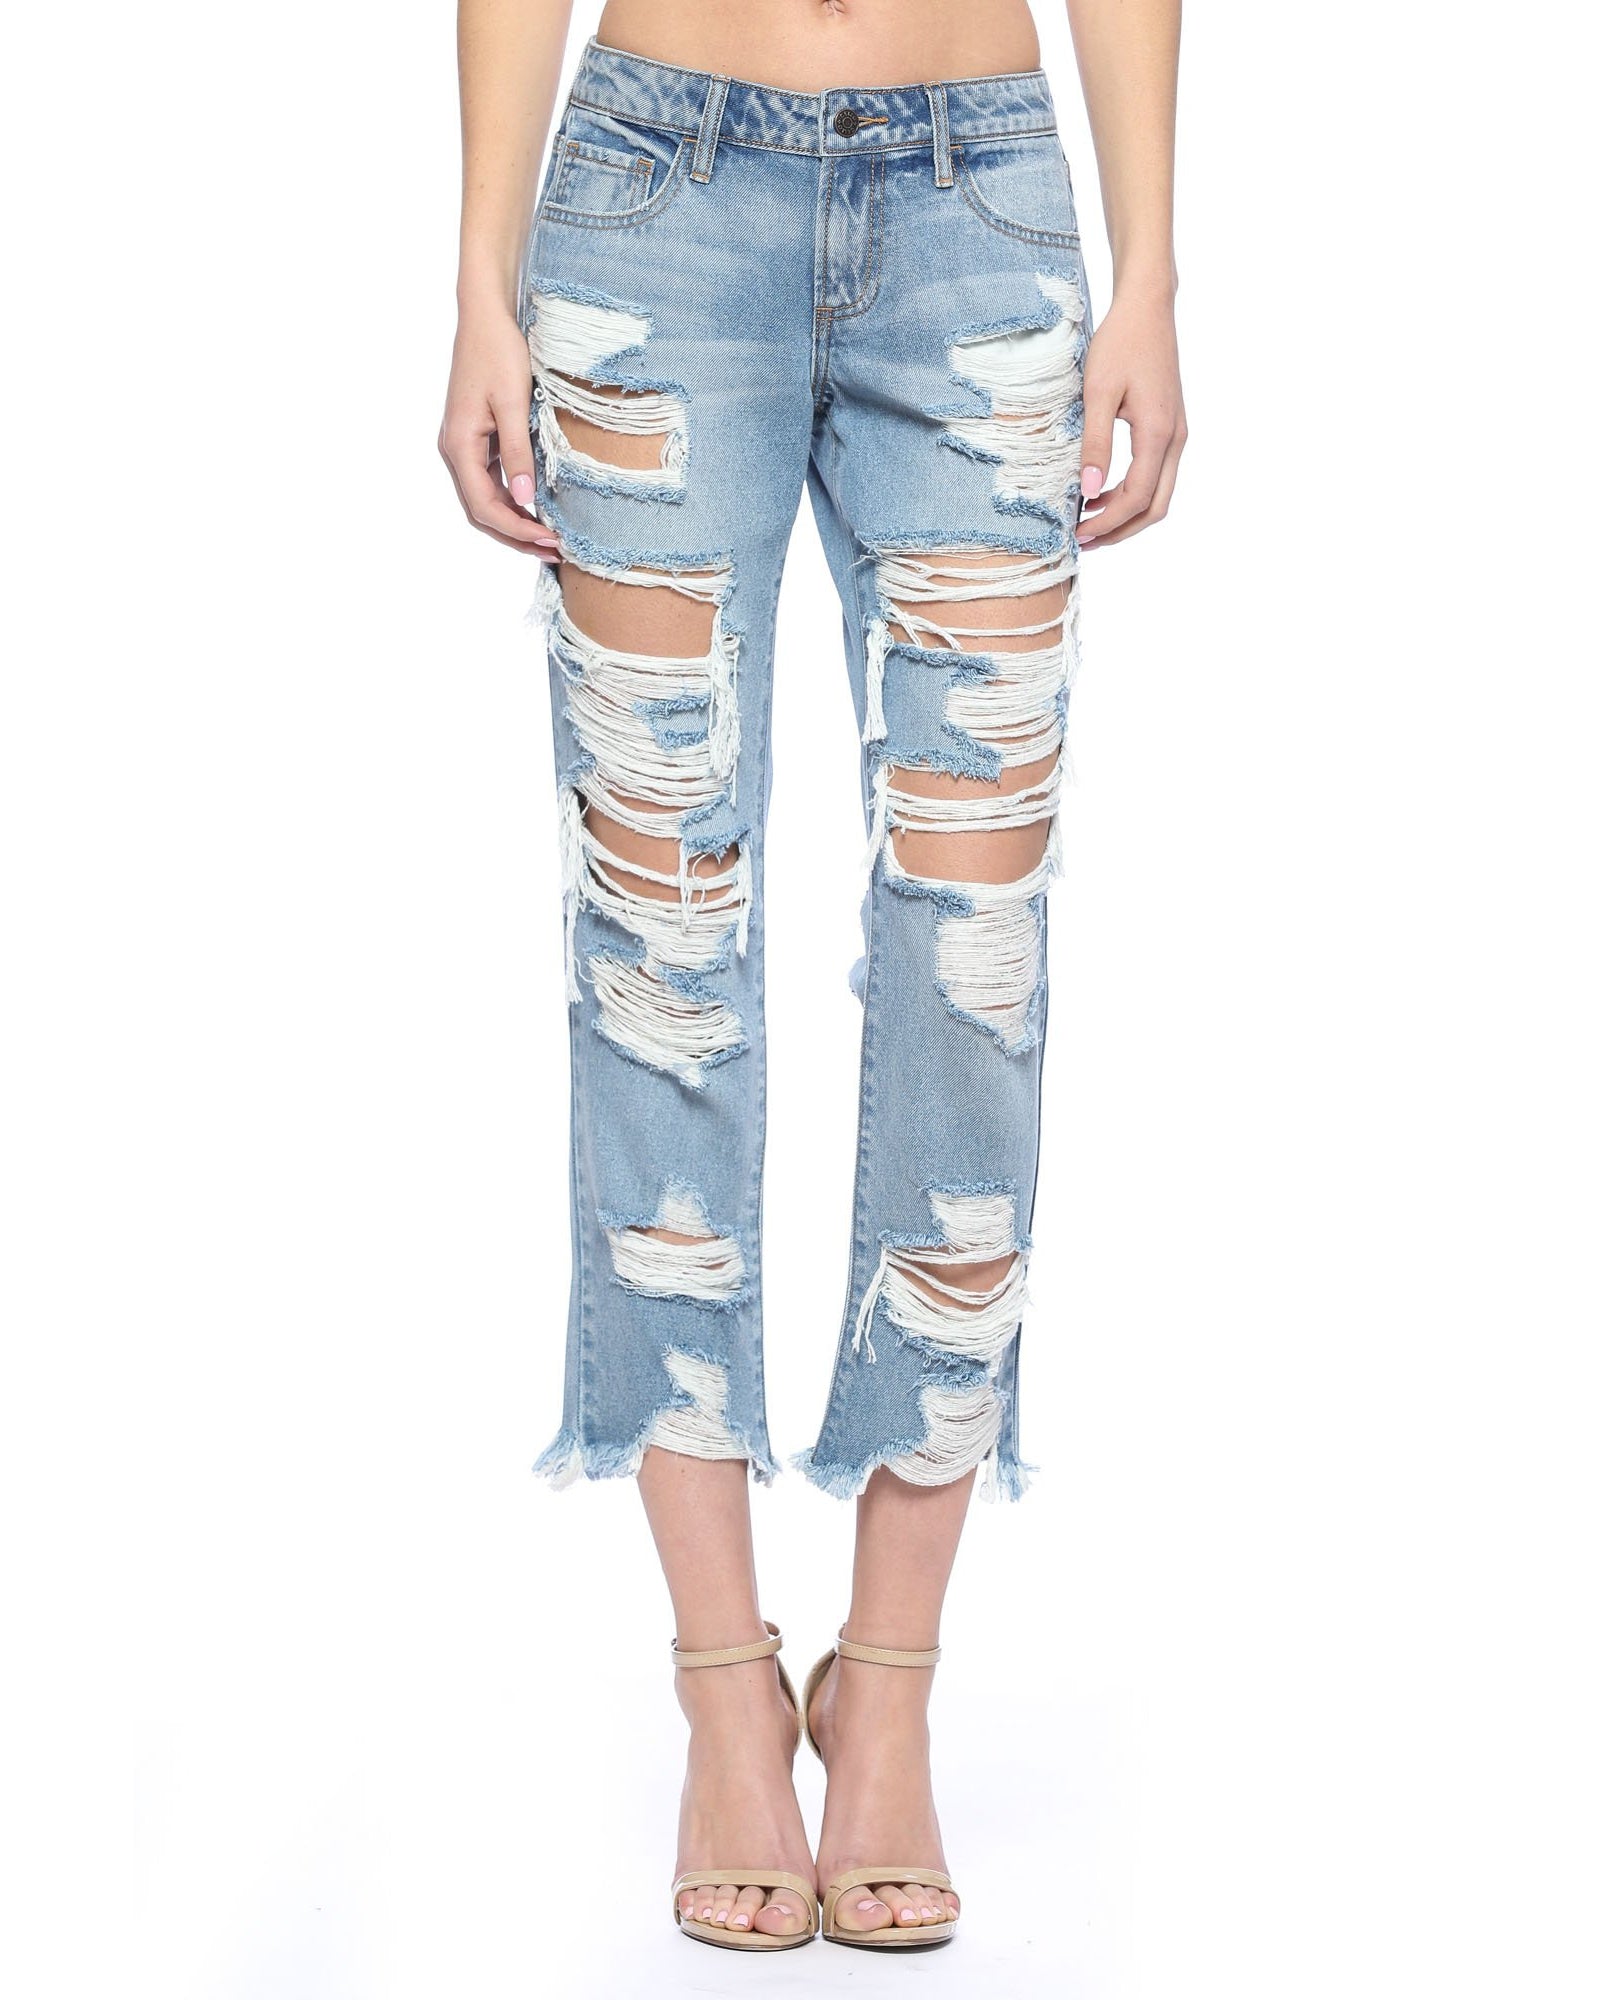 cello black ripped jeans